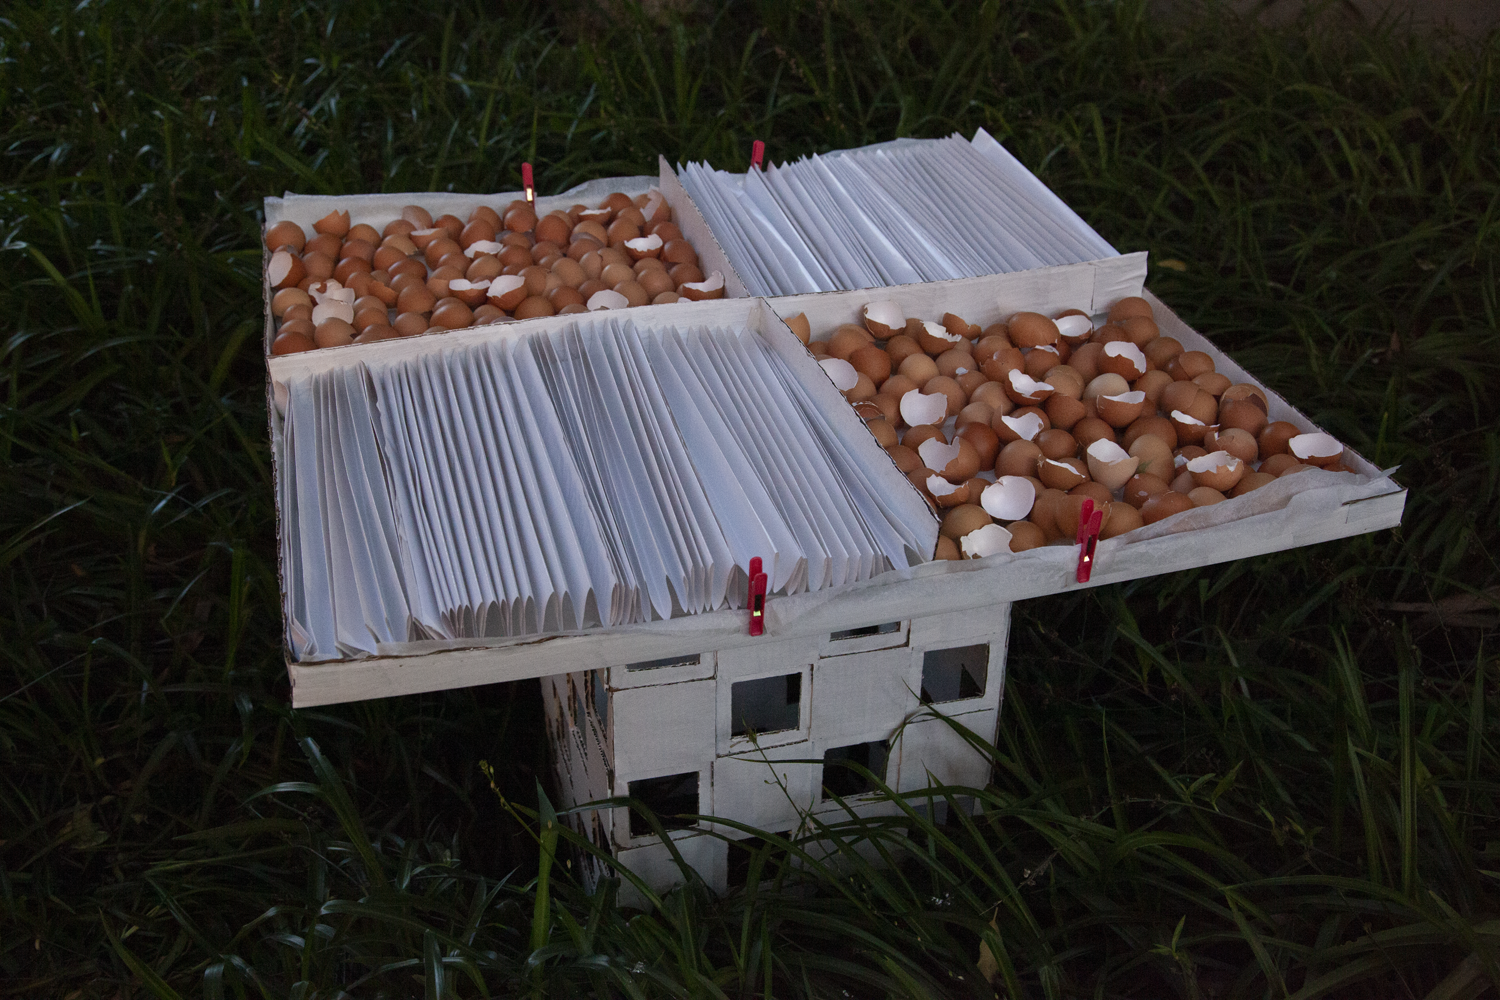 Painted white cardboard monument holding extended flat tray. Tray lined with baking paper and contains eggshells and accordian-folded paper across four alternating square sections.